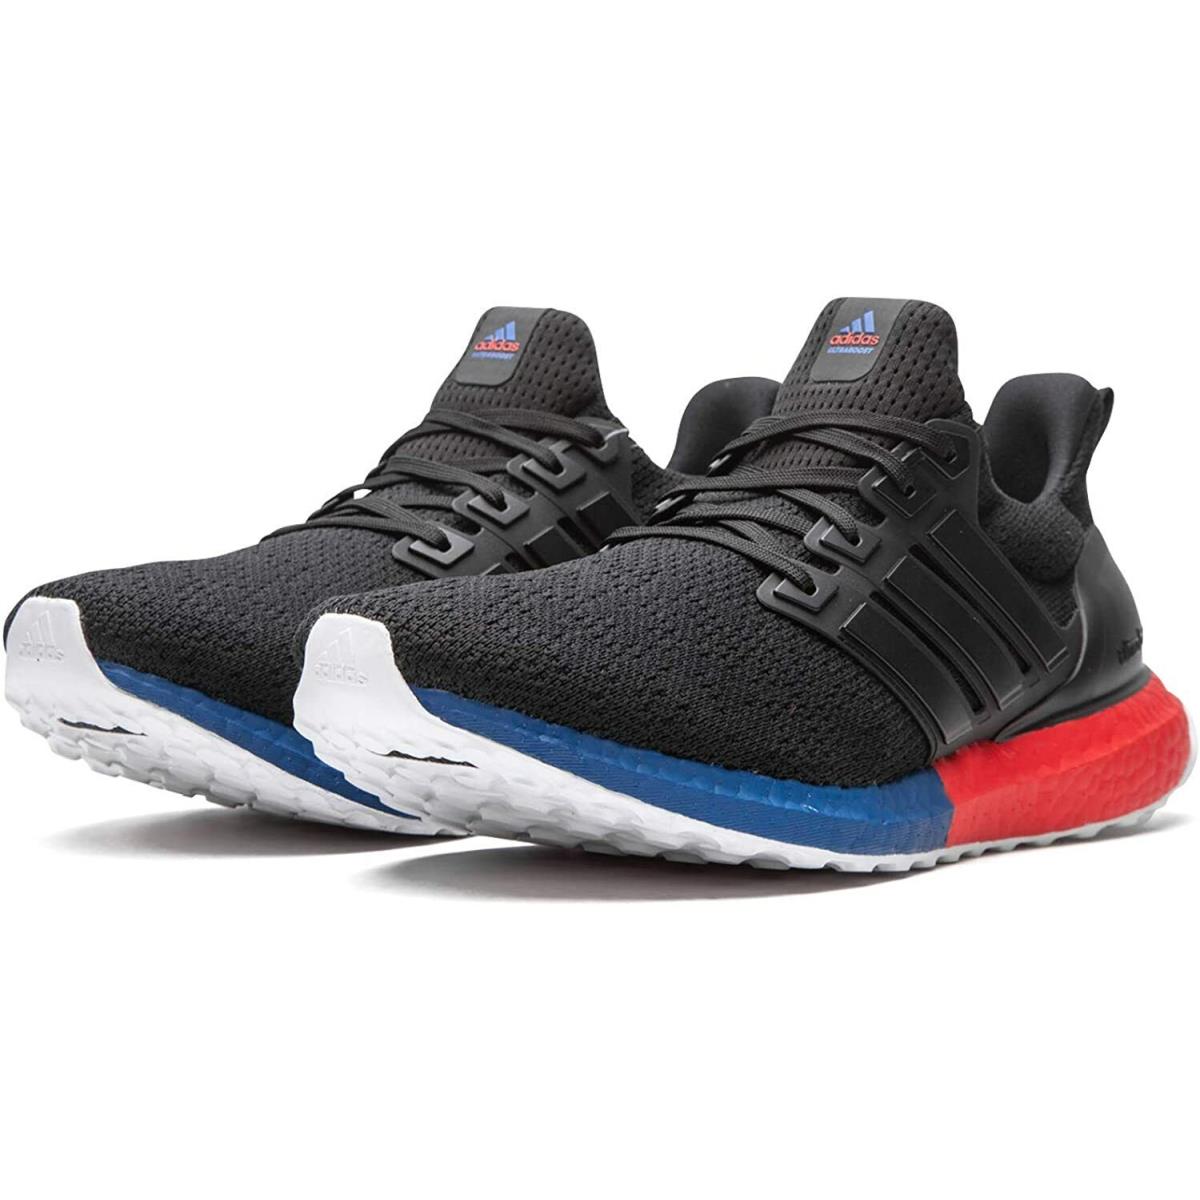 Adidas Ultraboost Dna Black Blue Red Boost Athletic Gym Running Shoes